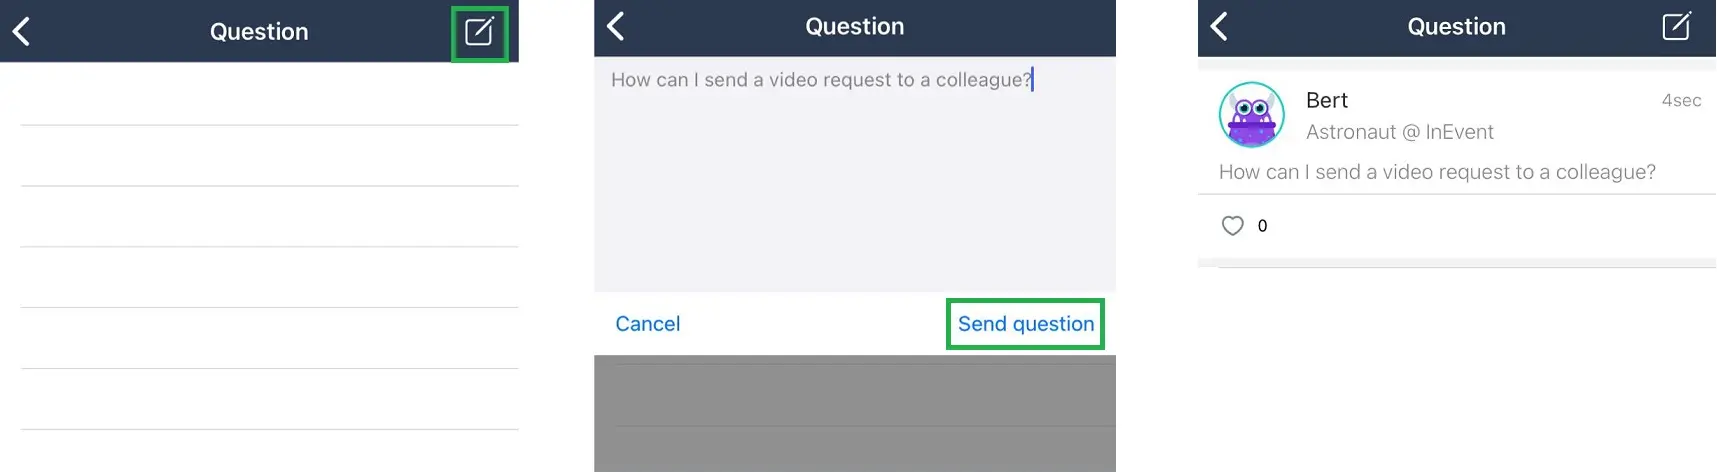 Asking a question using the app